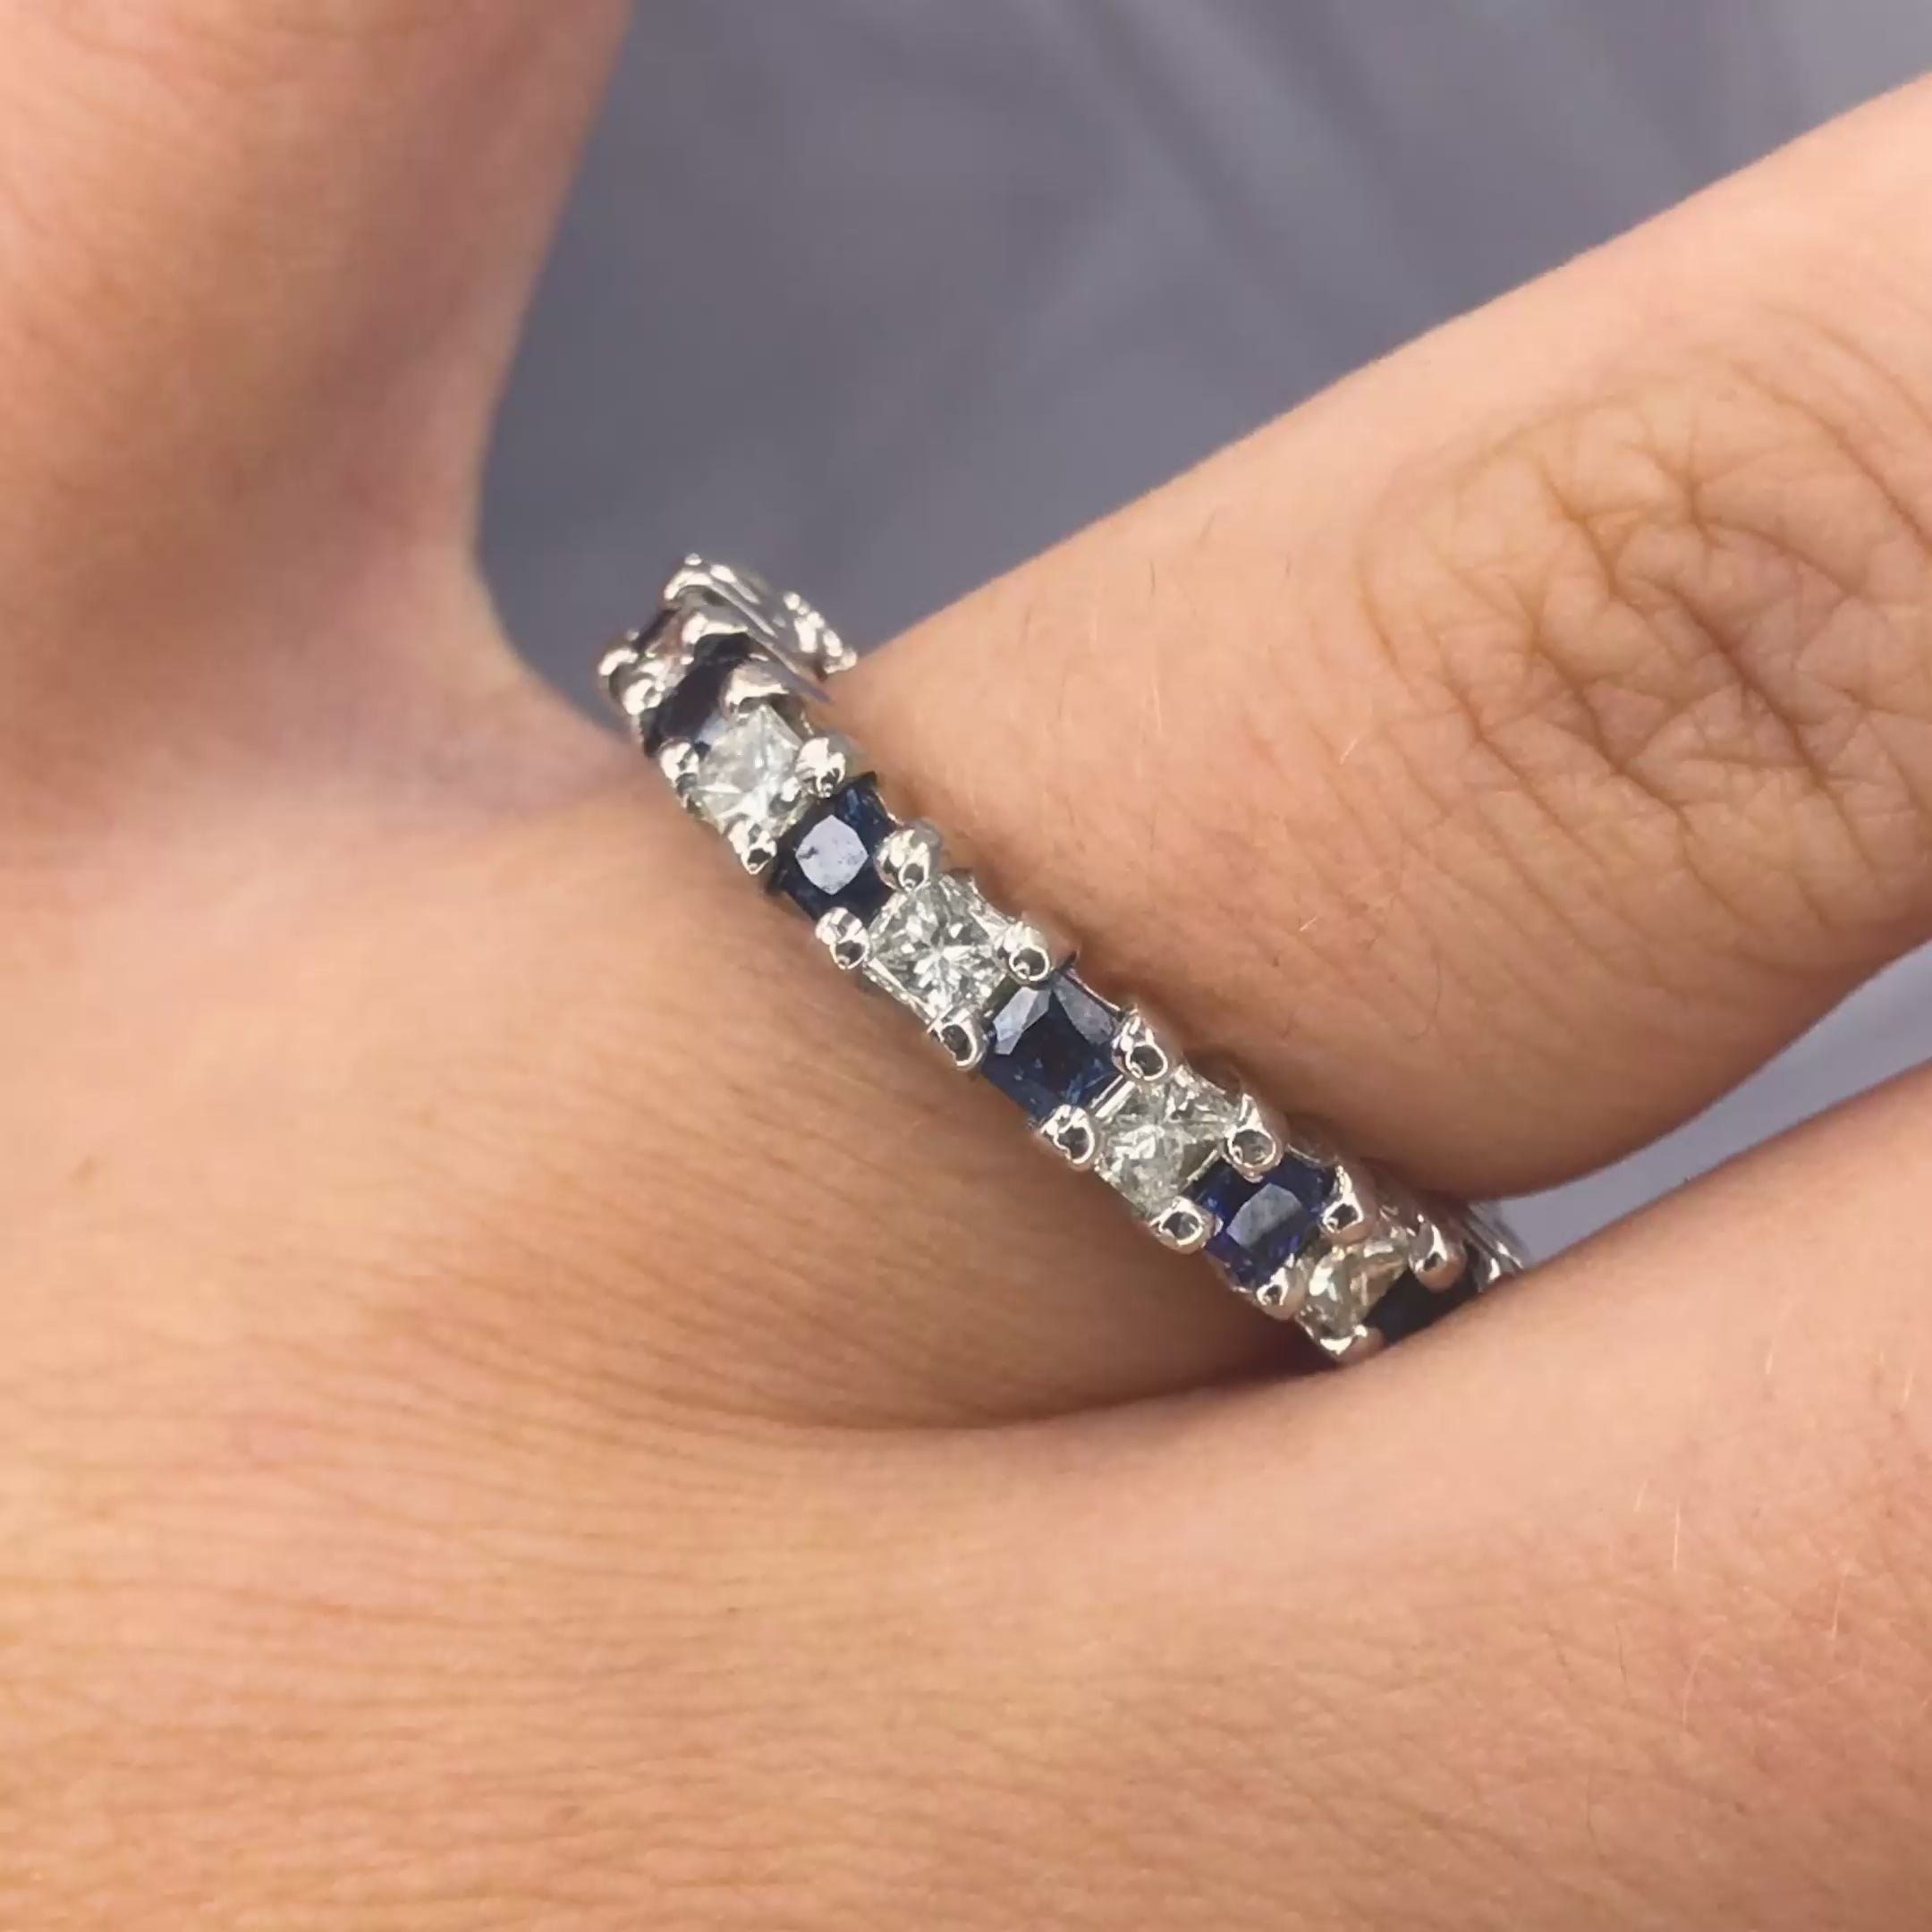 Reduced 3.40 CT Princess Cut Blue Sapphire and Diamond Eternity Ring in 14 KT White Gold